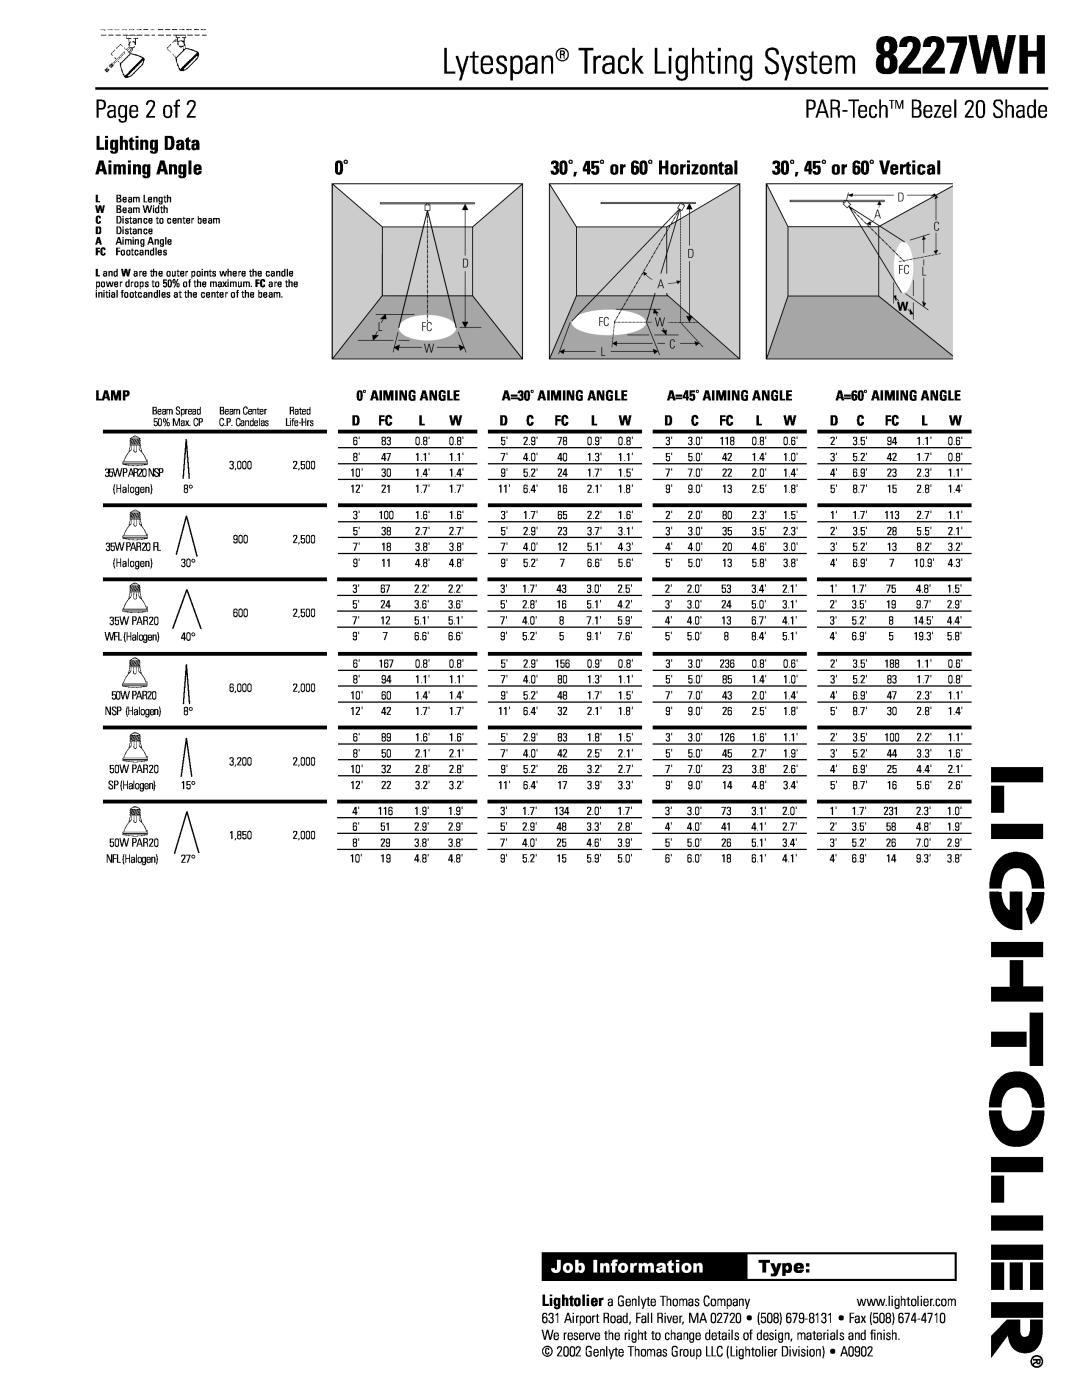 Lightolier 8227WH Page 2 of, Lighting Data, Aiming Angle, 30˚, 45˚ or 60˚ Horizontal, Type, PAR-TechTM Bezel 20 Shade 